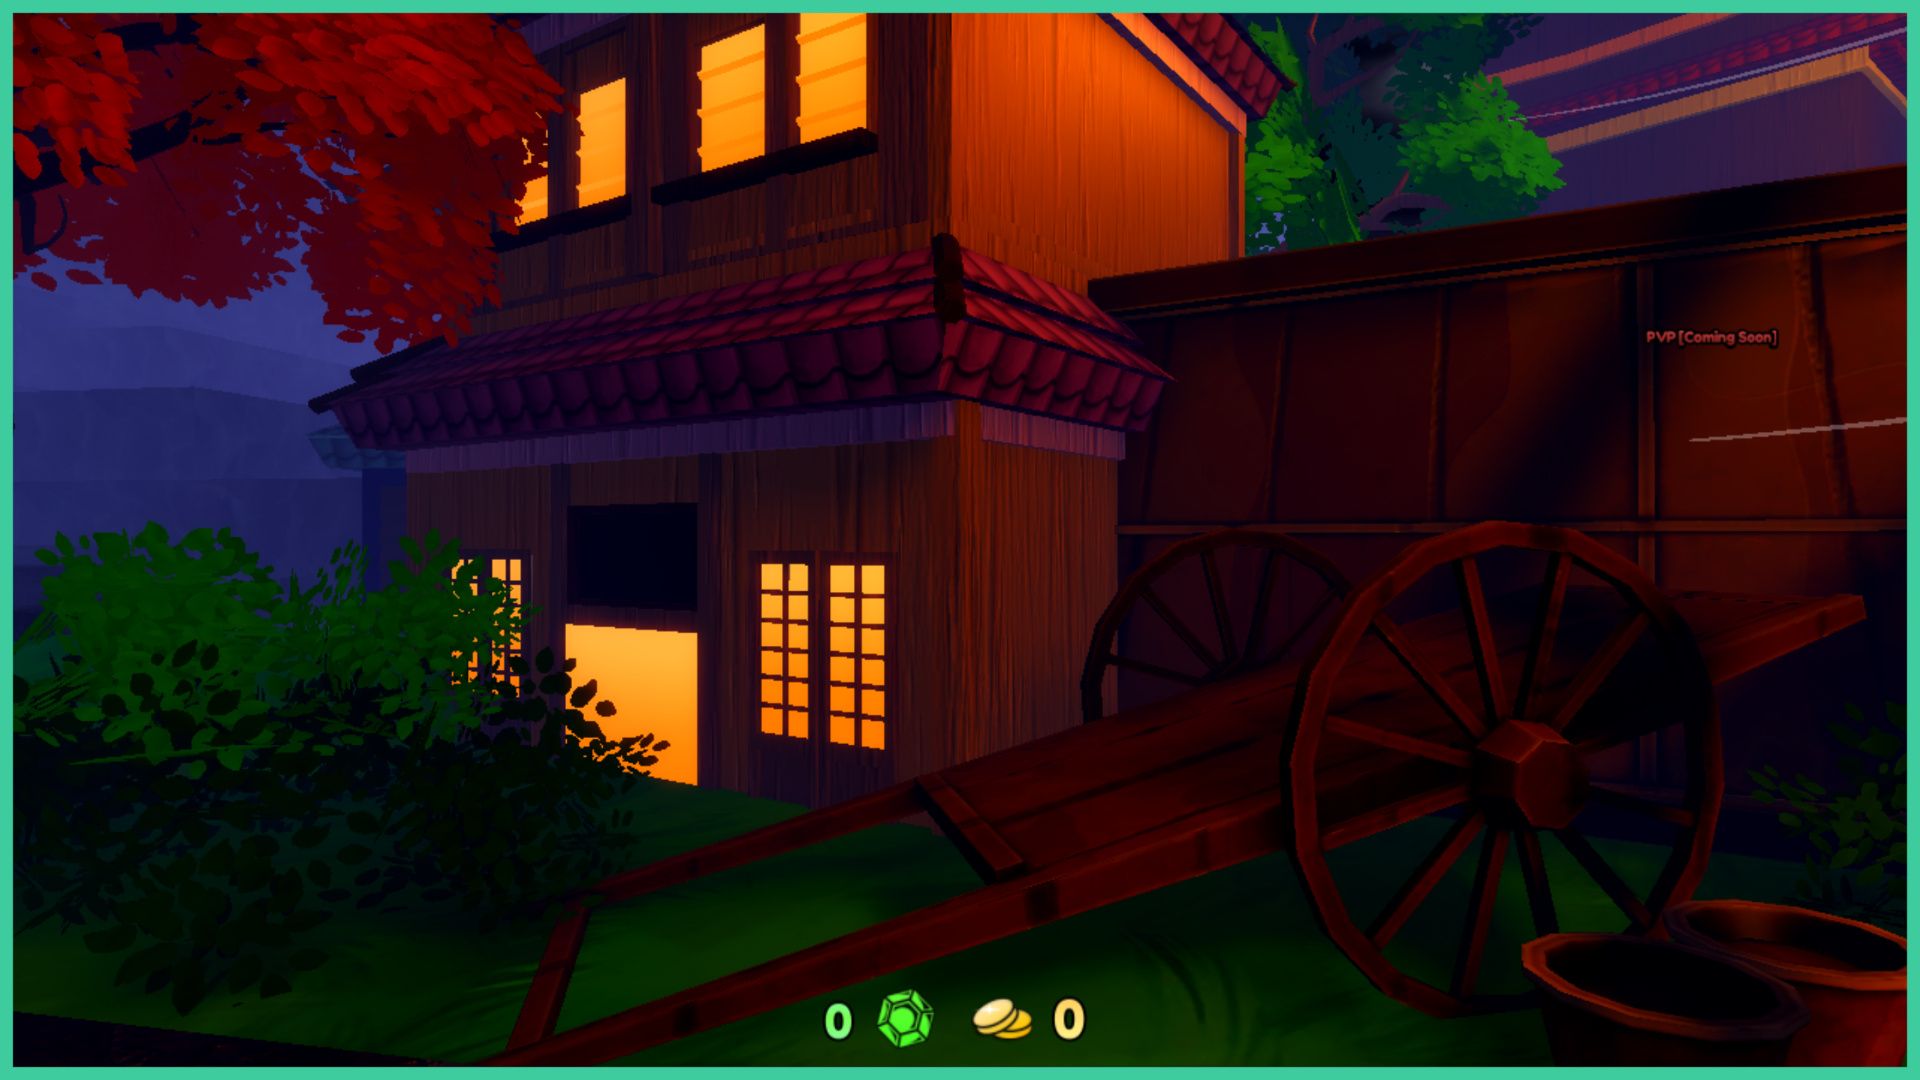 feature image for our anime last stand bruford guide, the image features a screenshot of an old style building with the lights on, with a wooden wagon outside next to 2 wooden buckets on the grass, there is a bush to the left of the house and a tree